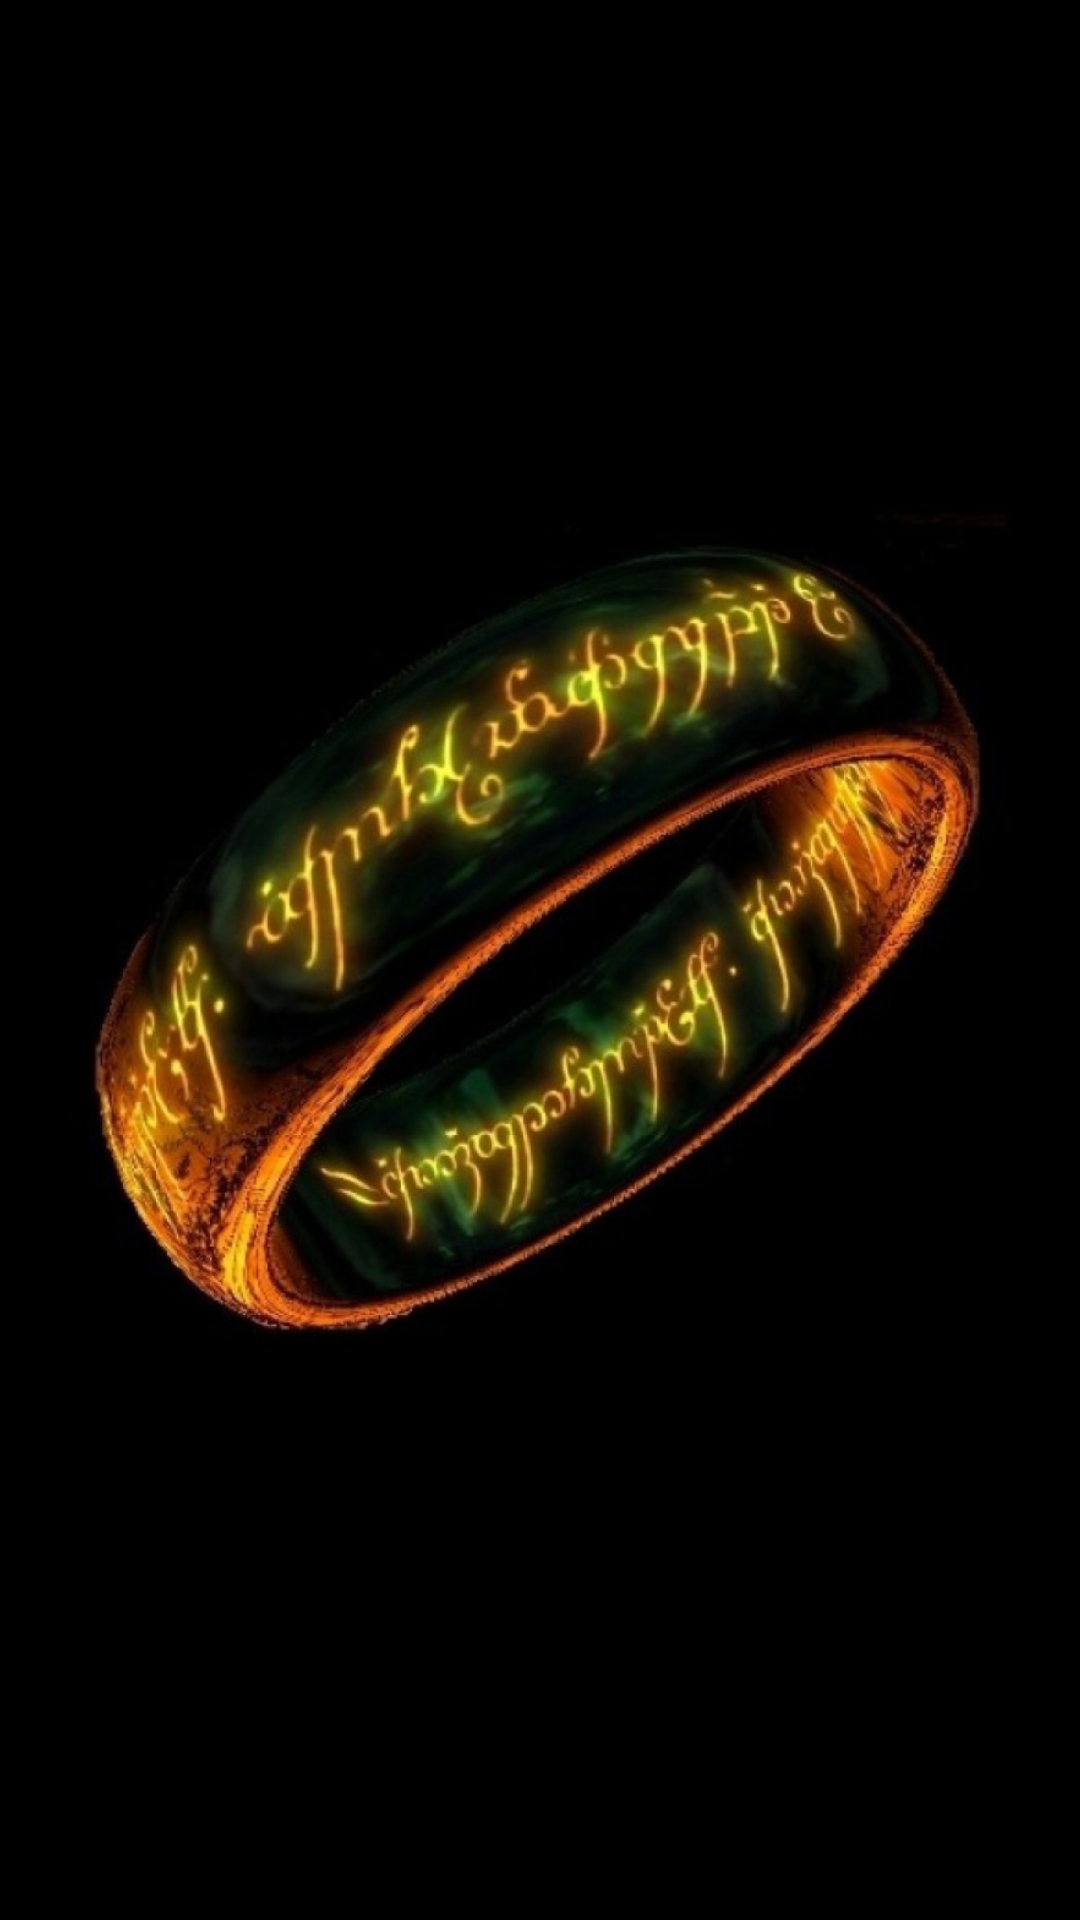 The Lord of the Rings wallpaper 1080x1920